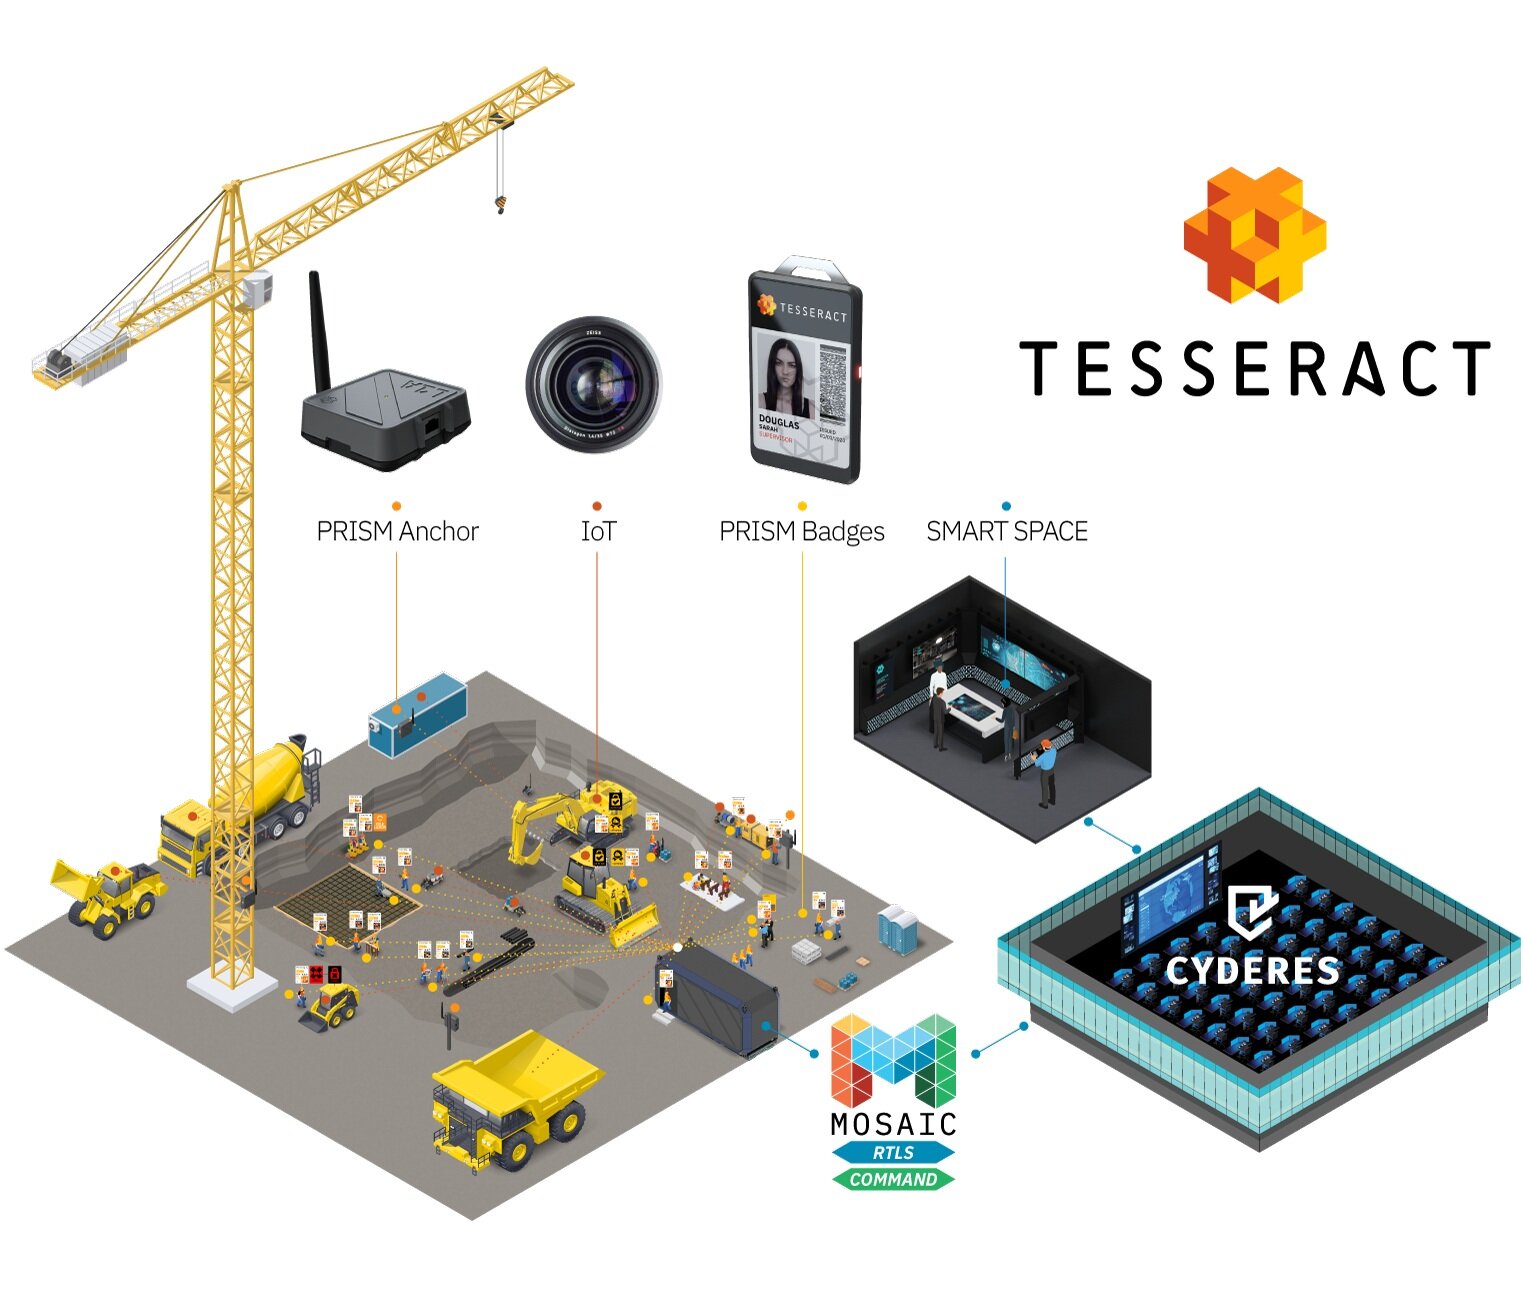 On the construction site, PRISM anchors and badges combined with IoT feed data into Mosaic and the Tesseract SMART SPACE, all under the umbrella of safety Cyderes provides.